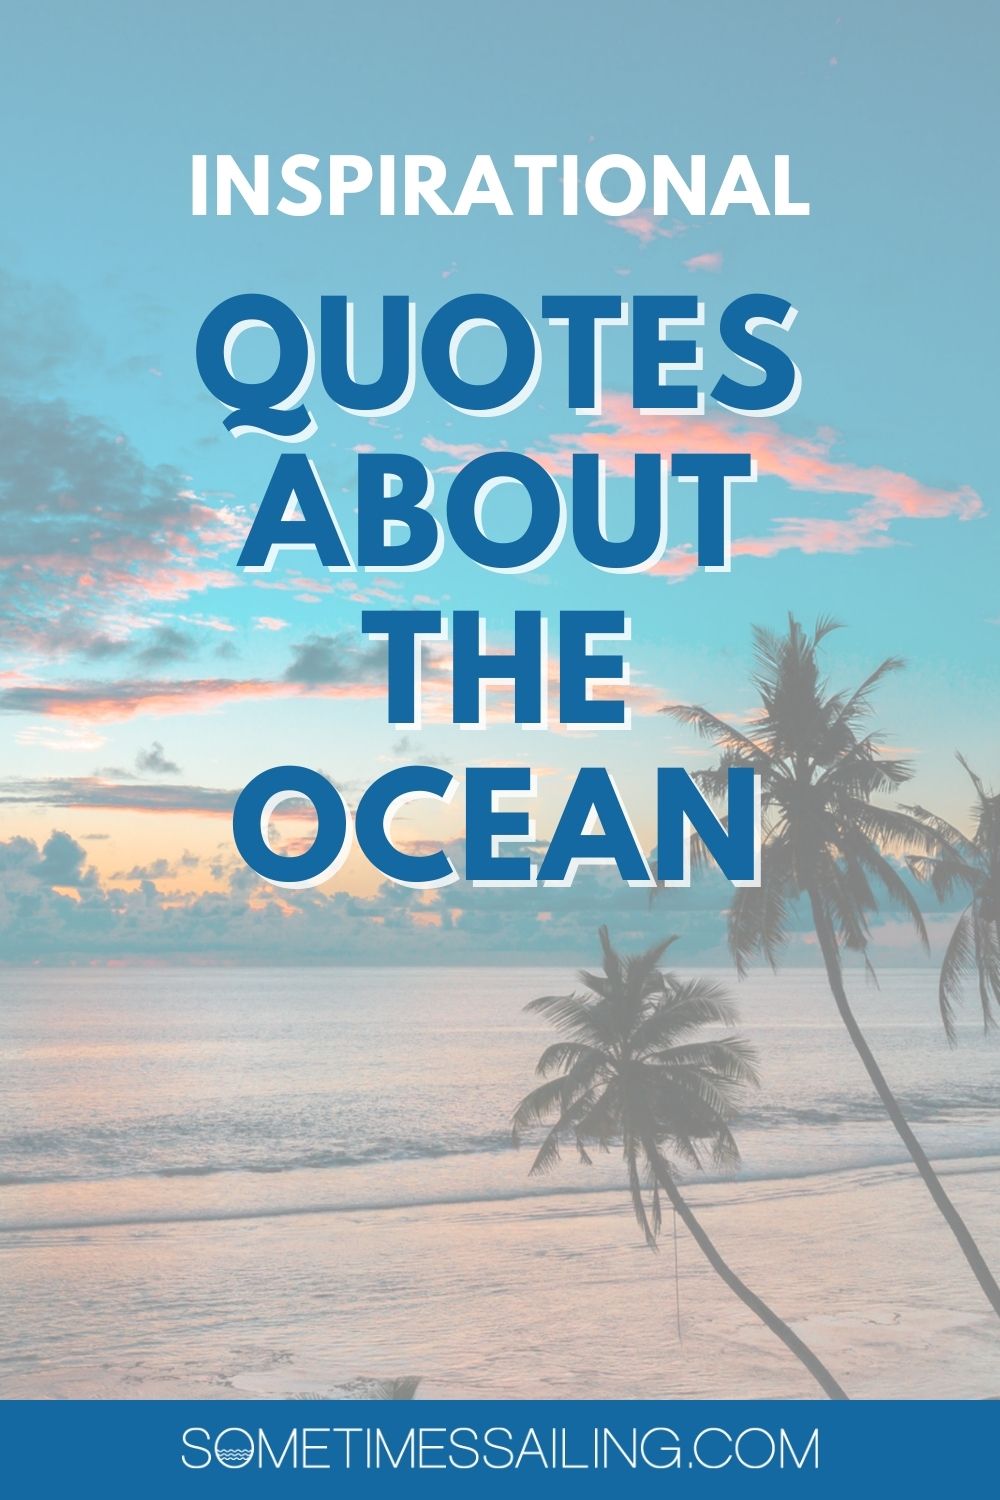 Quotes about the Ocean pinterest graphic with an image of the ocean with a sunset and palm trees behind it.